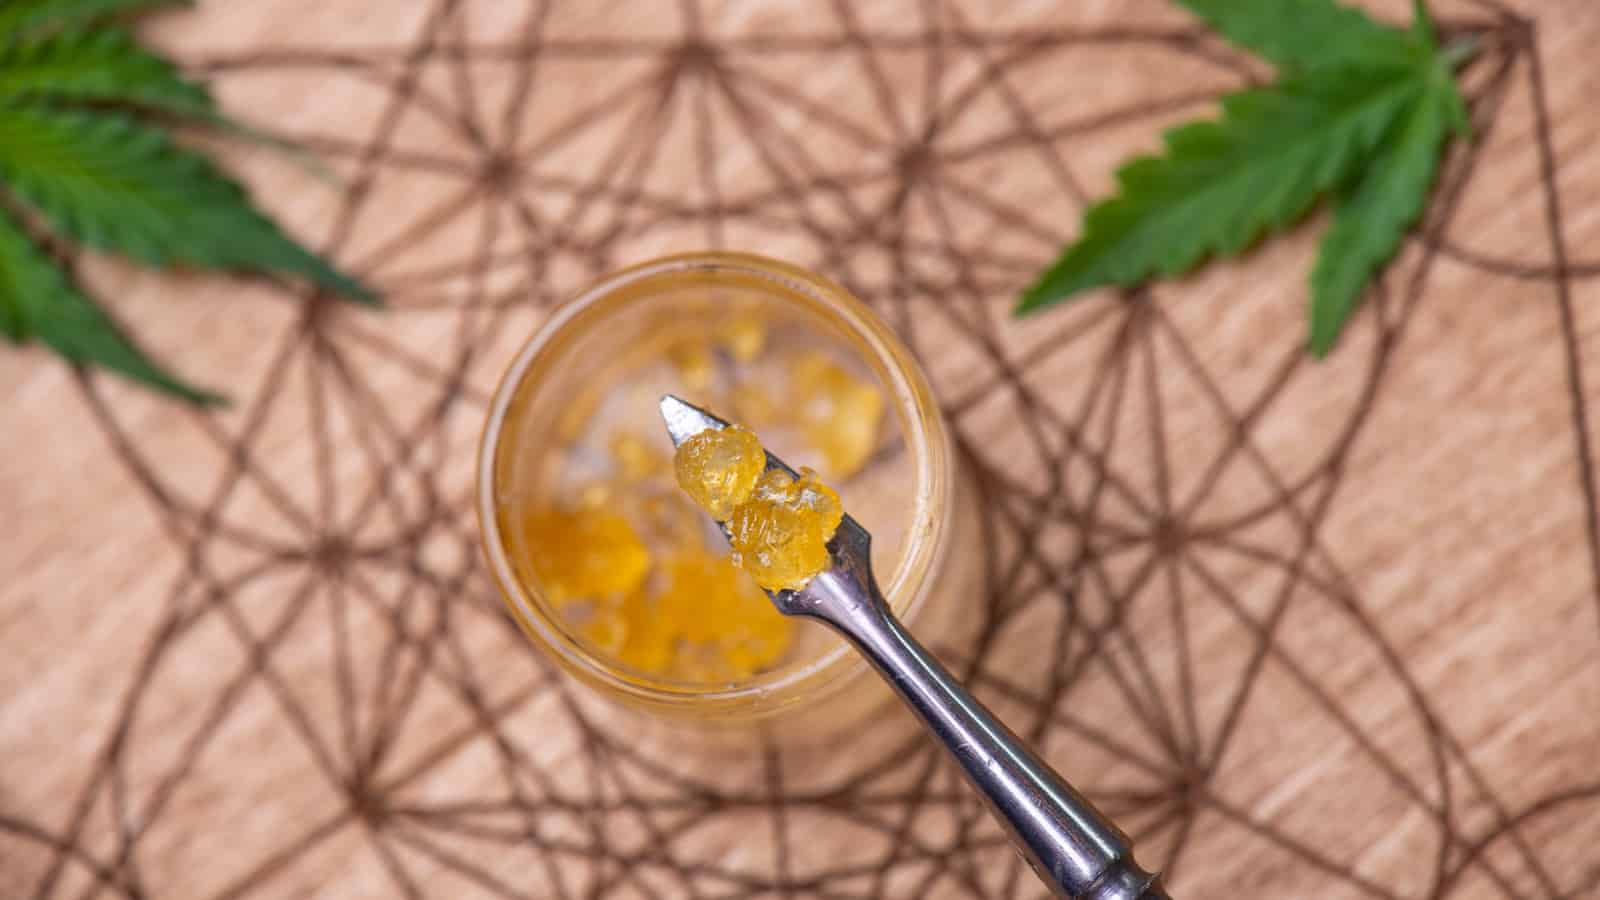 Cannabis Extracts